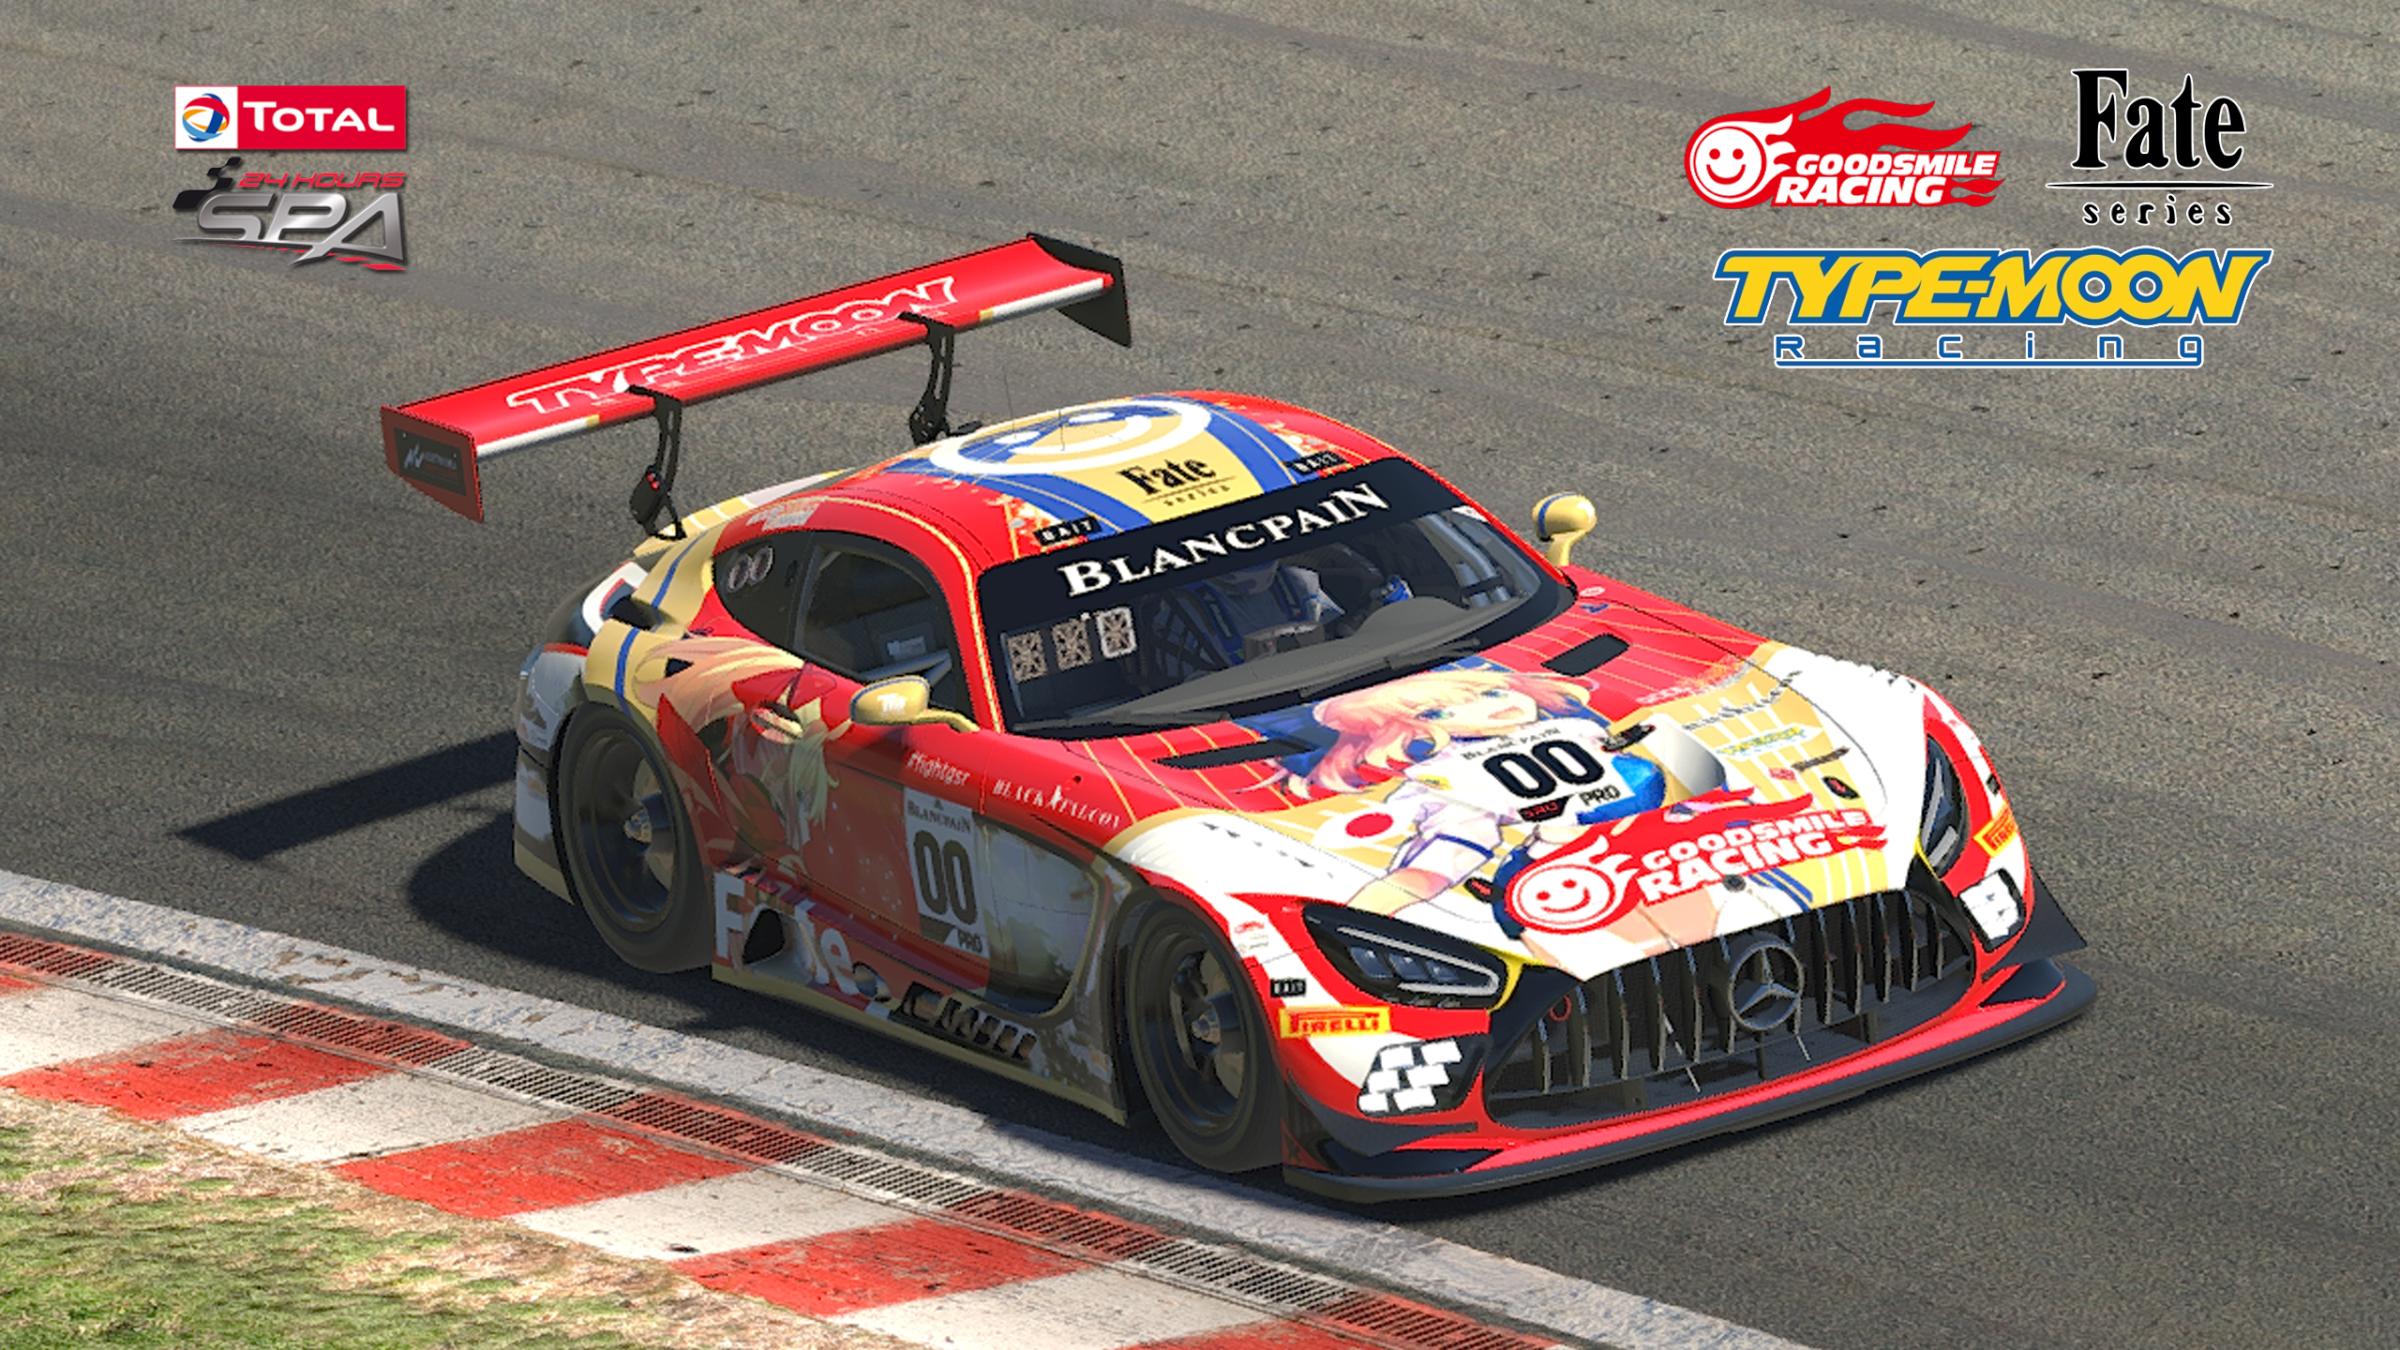 Preview of #00 Type Moon Racing - Fate - Test Day (2019 Spa 24 Hours) by Shinya Sakuta